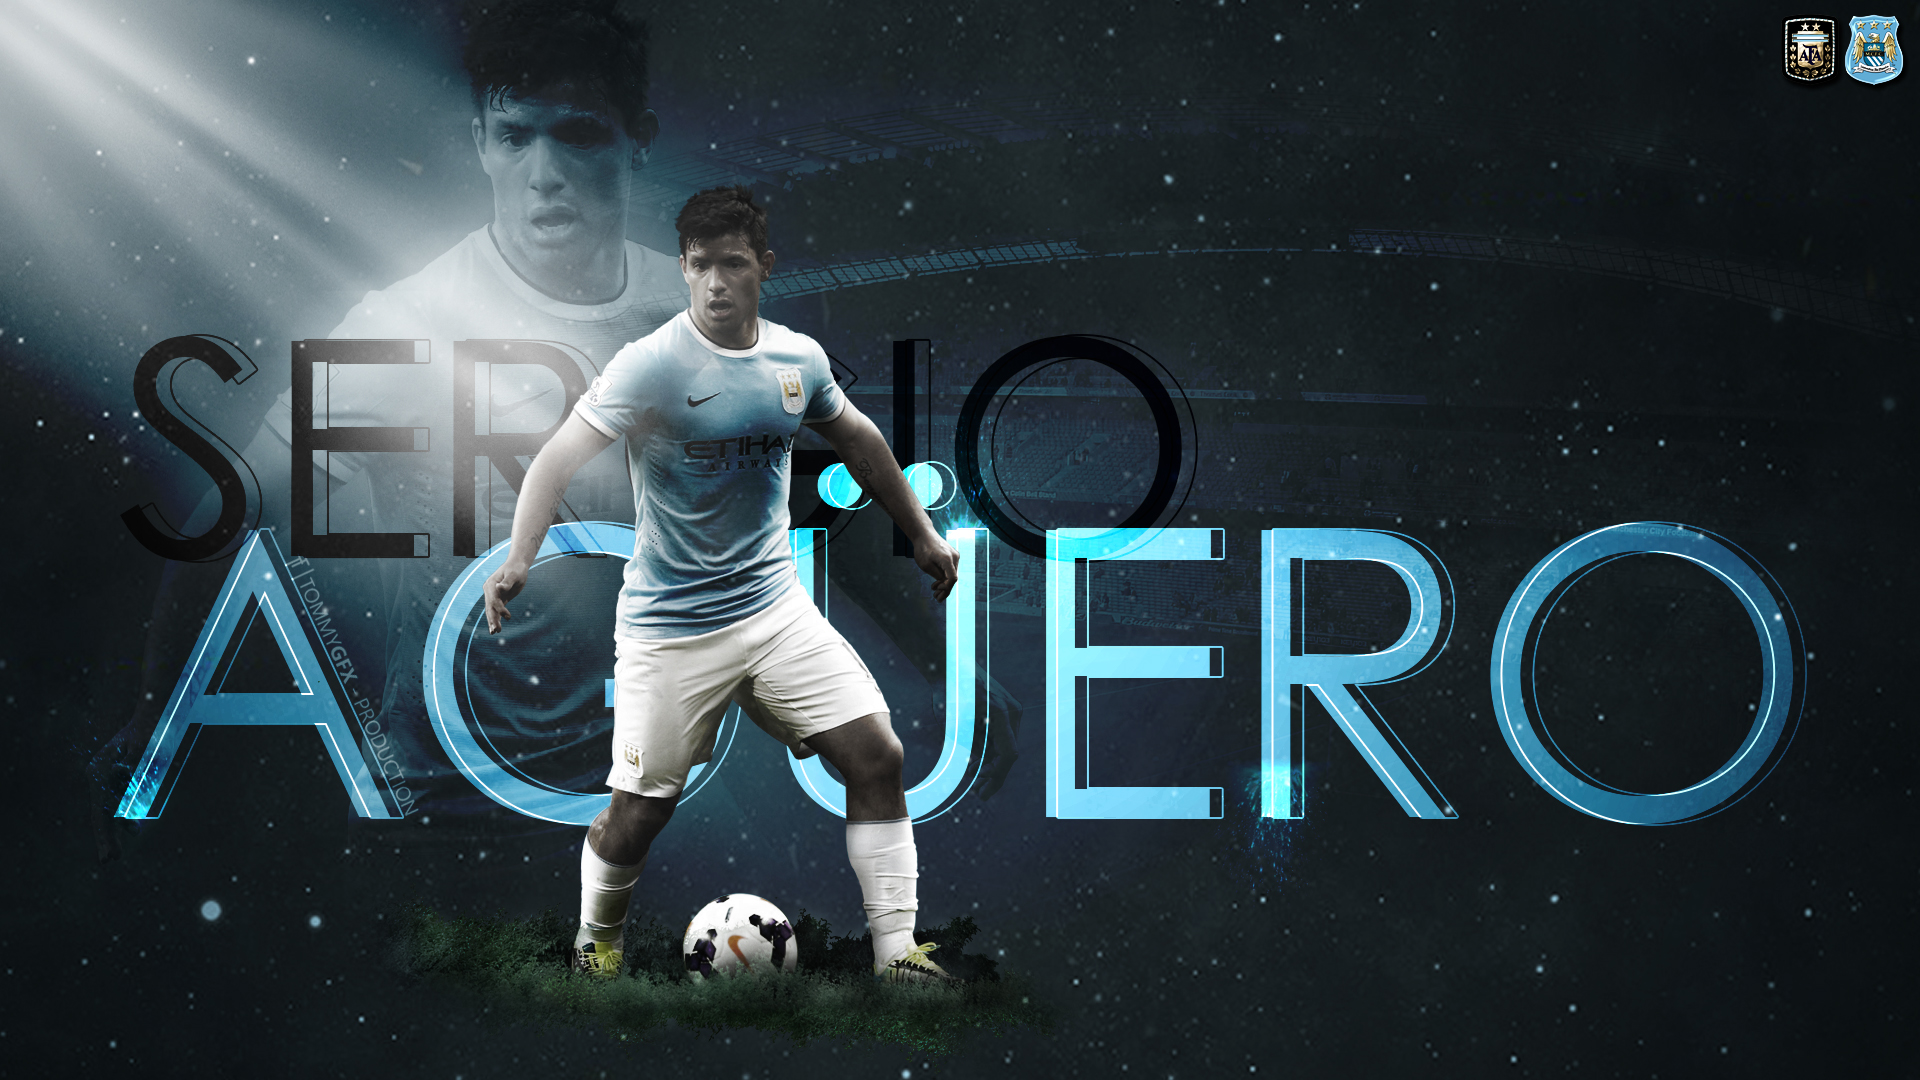 Sergio Agüero wallpapers for desktop download free Sergio Agüero pictures  and backgrounds for PC  moborg